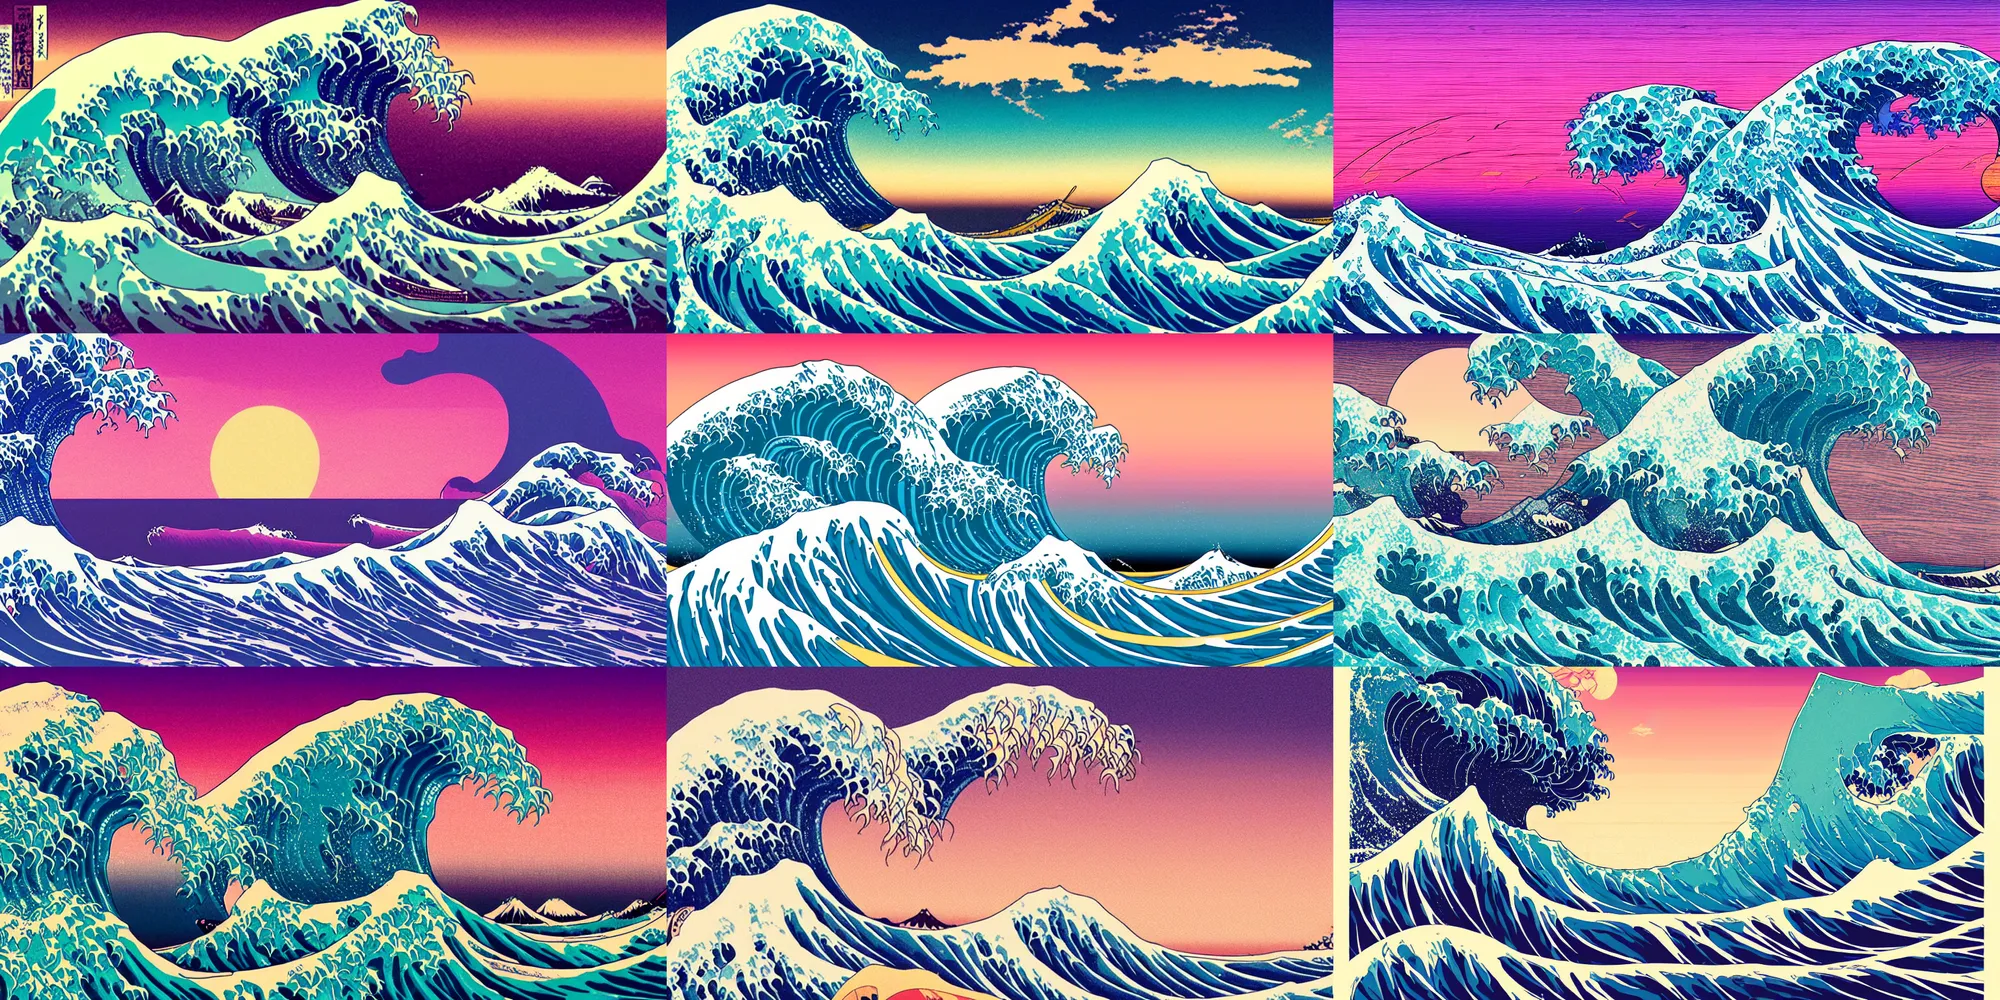 Prompt: vaporwave sunset, waves crashing in the sea, glitch art aesthetic, poster, in the style ukyo - e, wood incision, hokusai